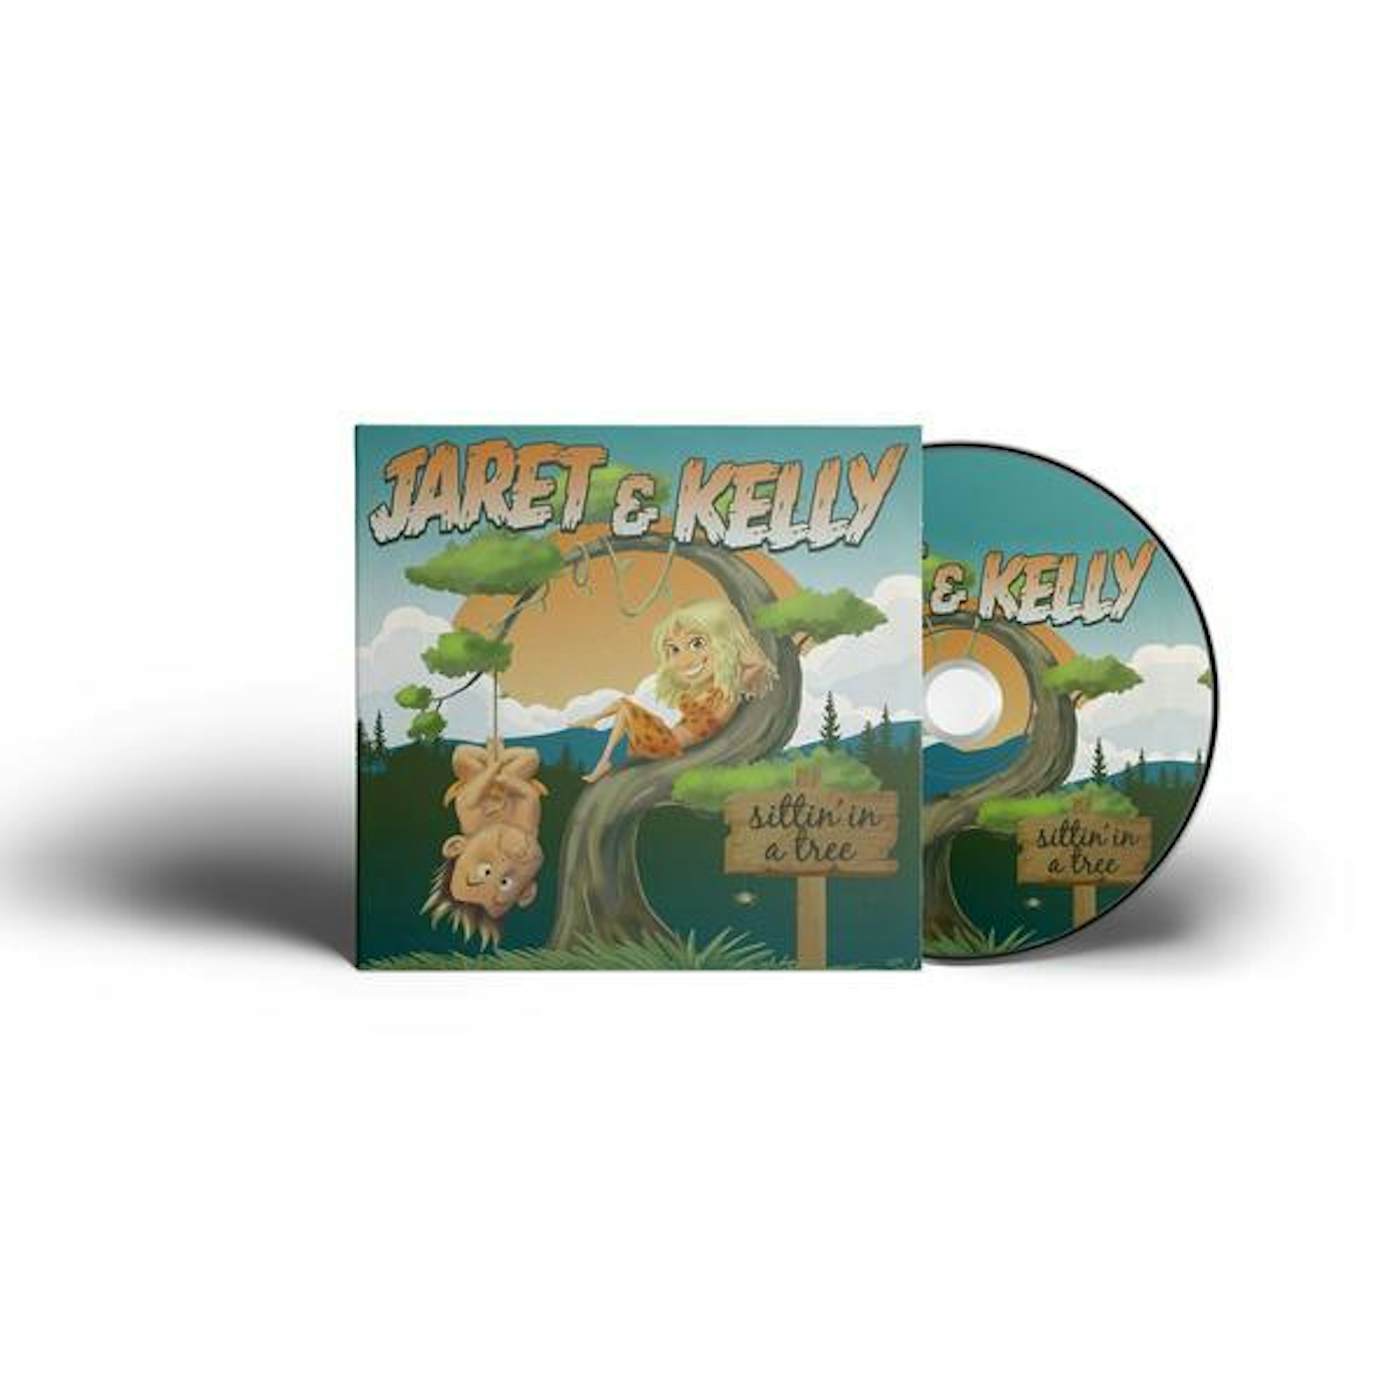 Jaret and Kelly - Sittin' in a Tree Autographed CD